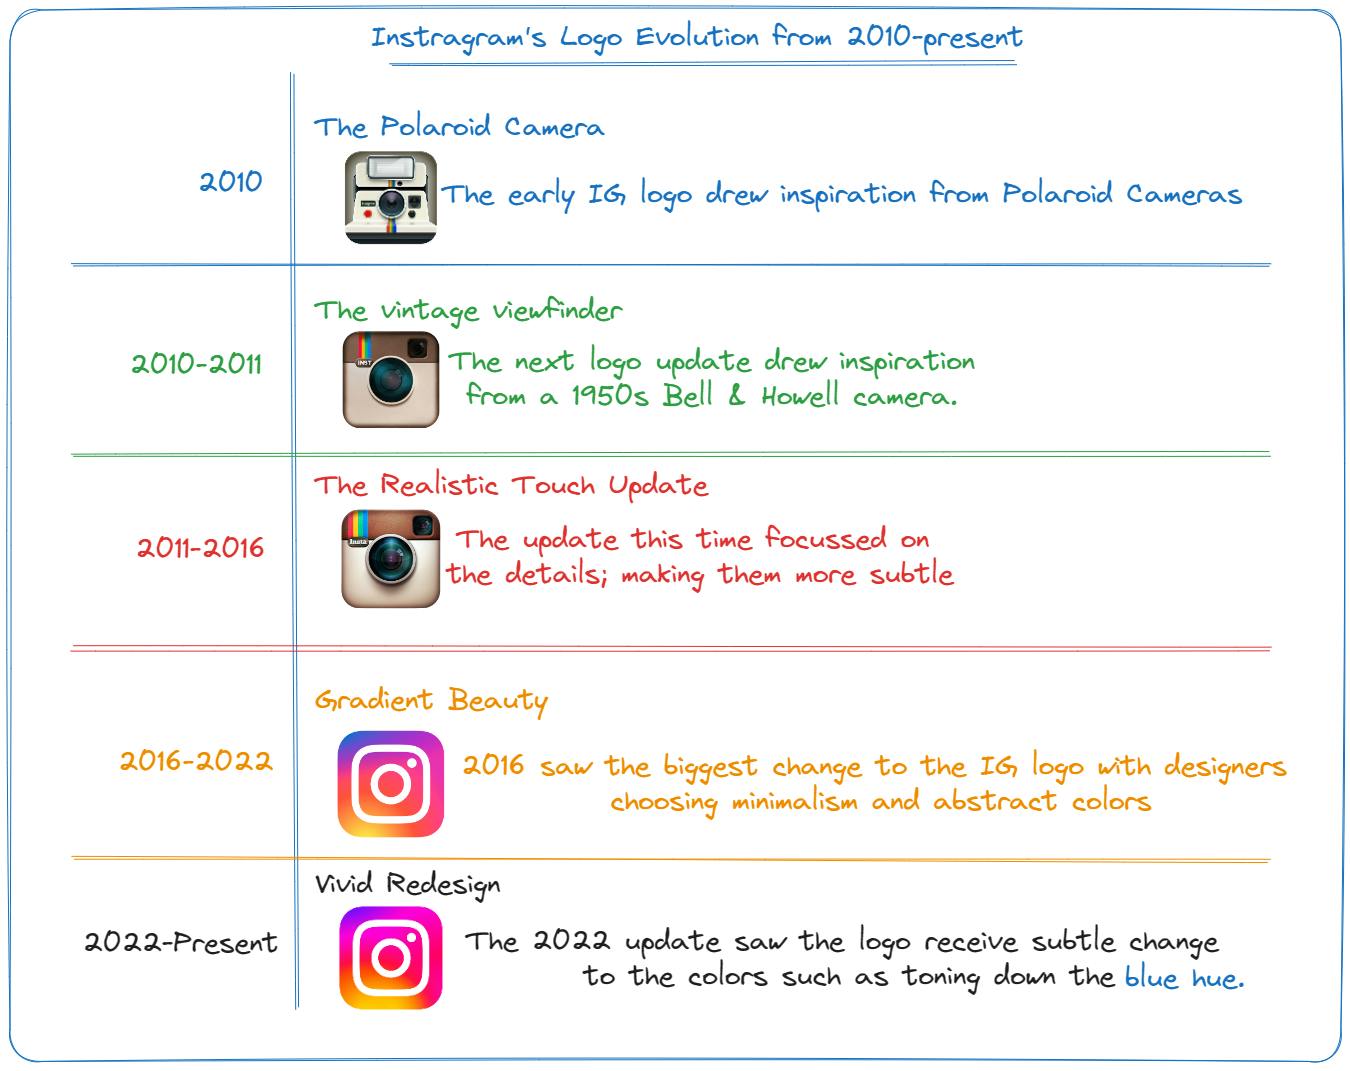 Instagram logo changes from 2010 to 2023